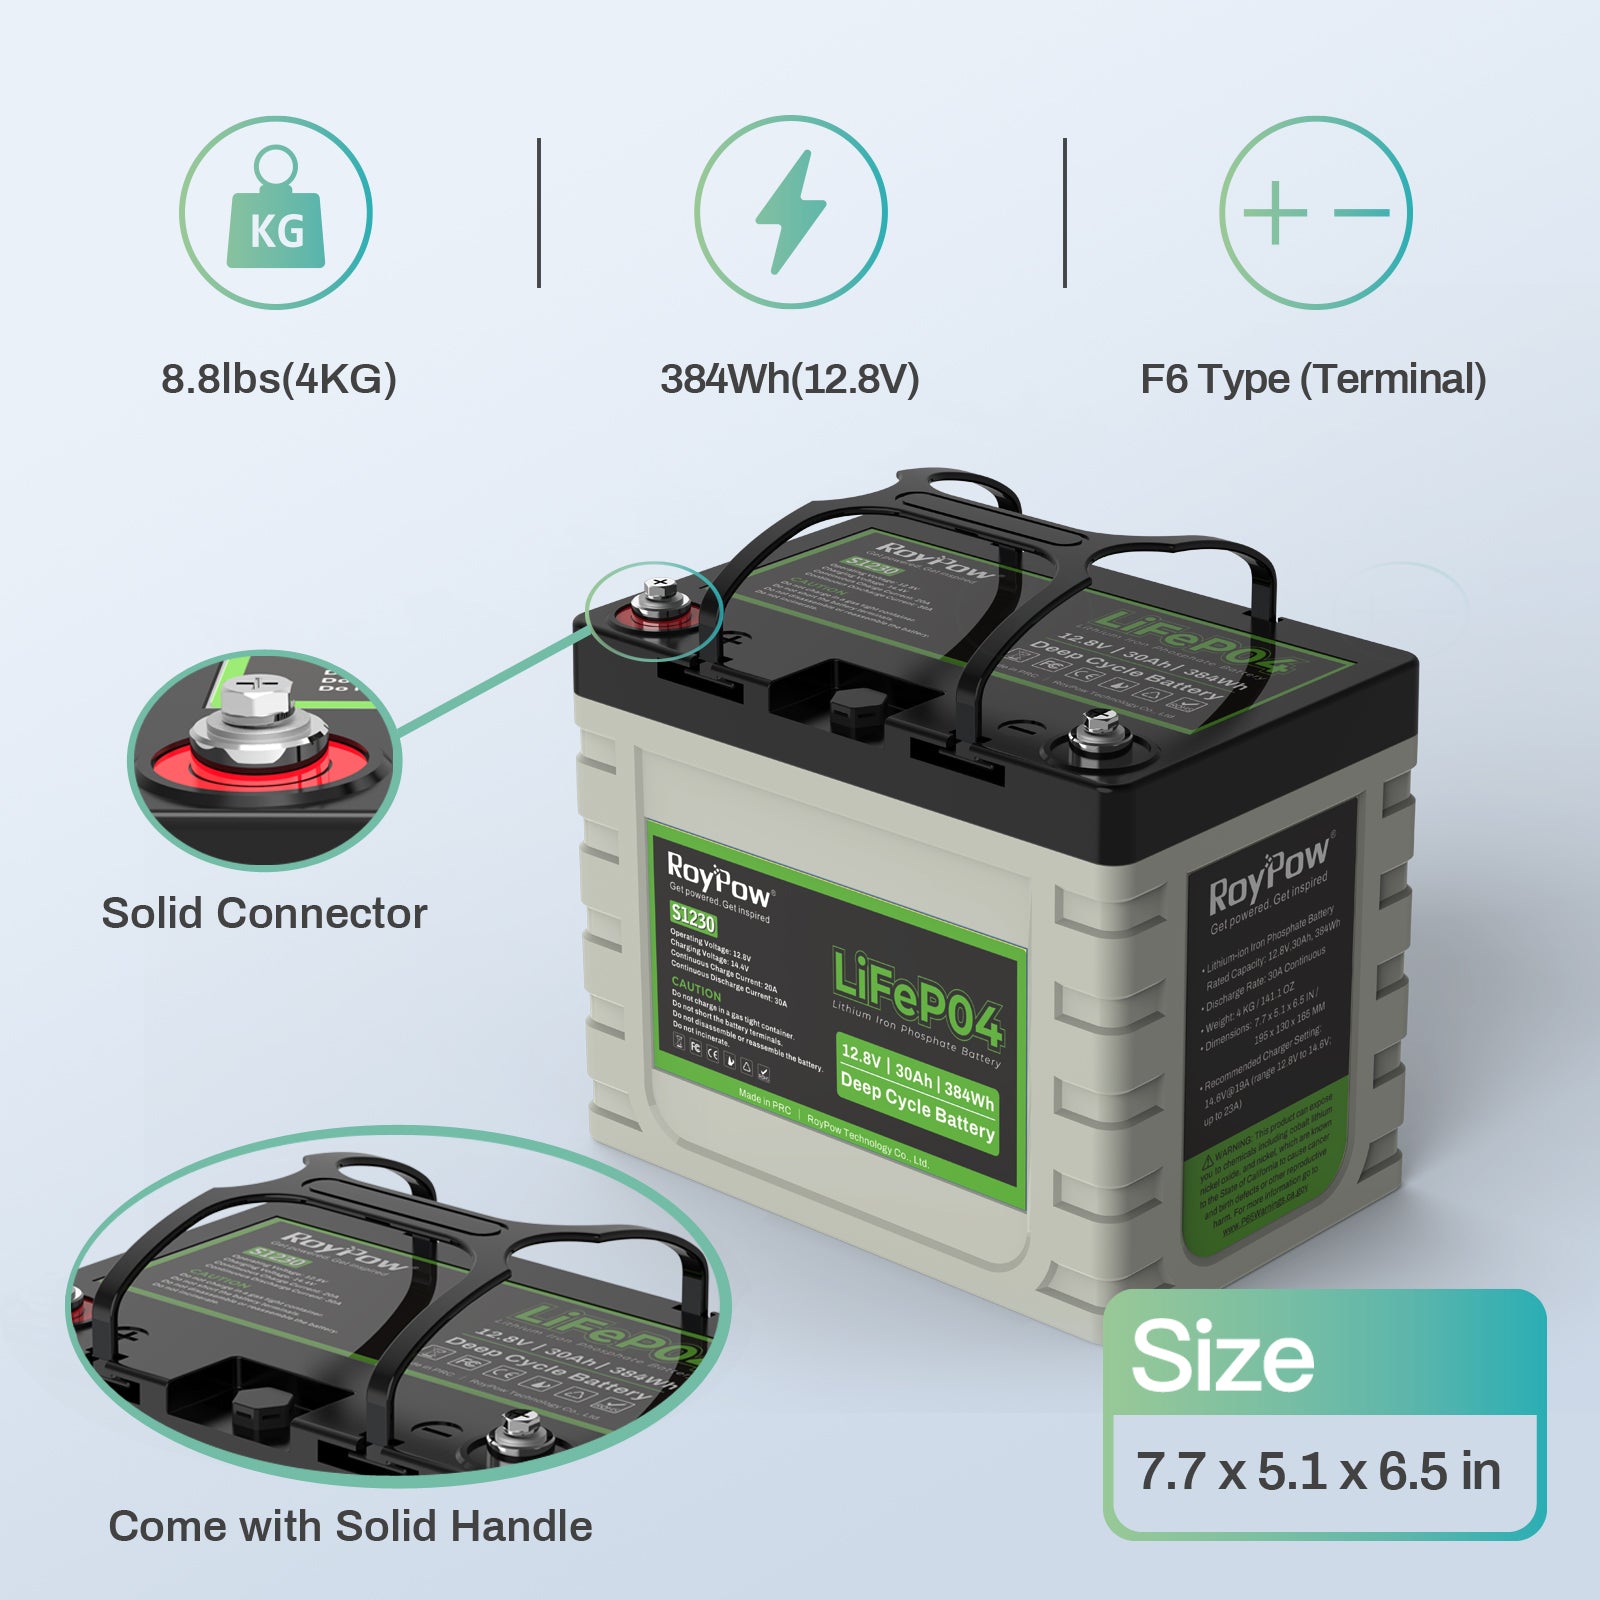 RoyPow 12V 30AH LiFePO4 deep cycle rechargeable battery